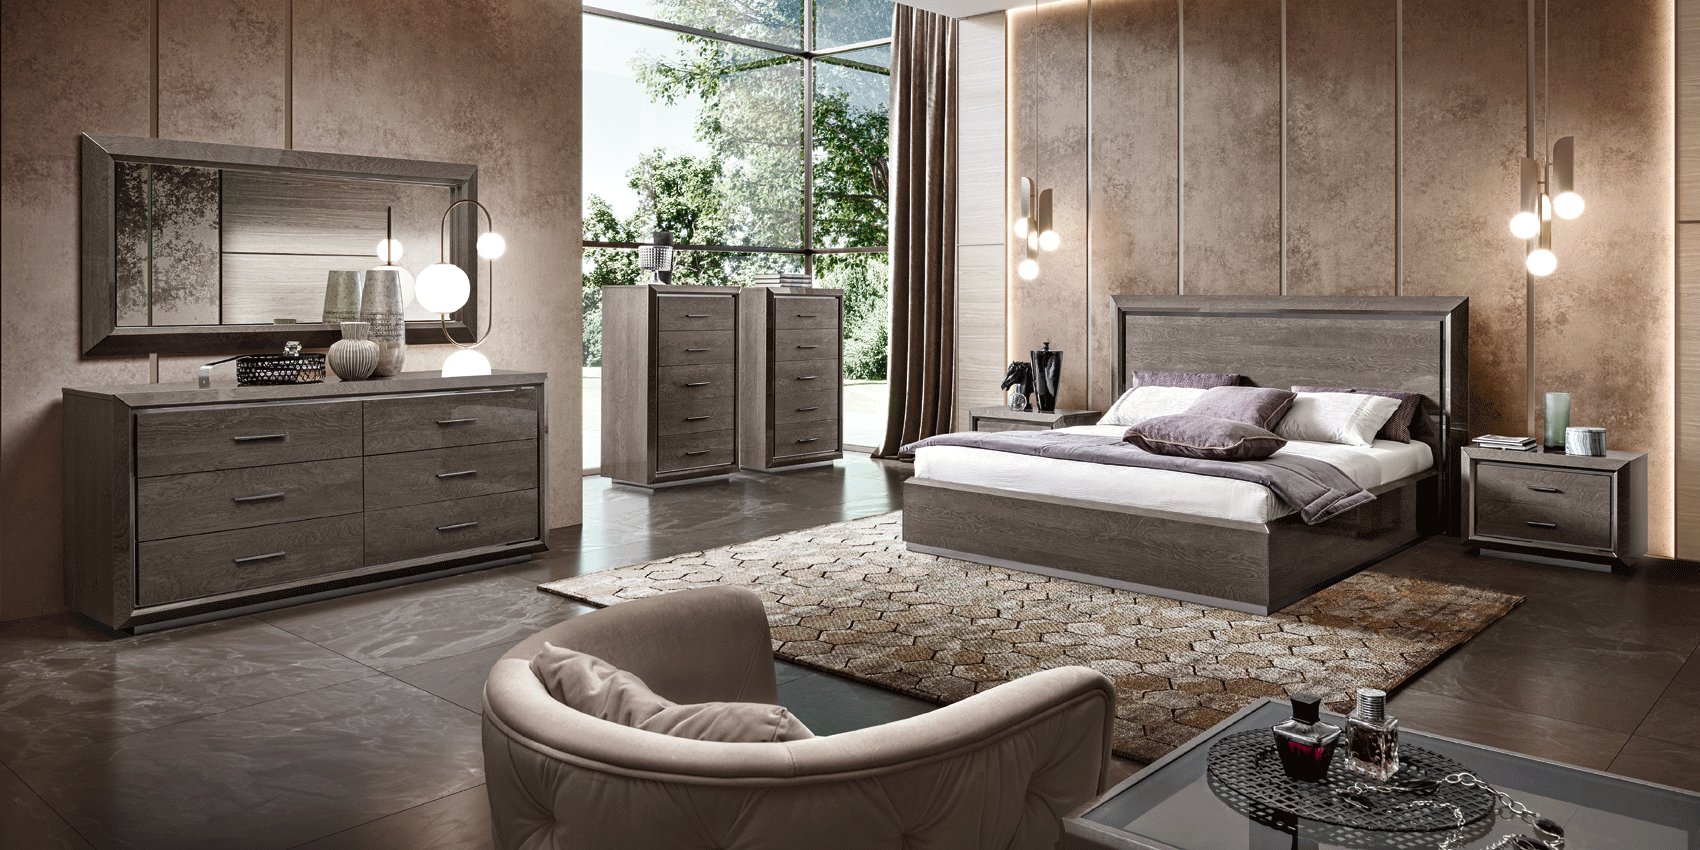 Bedroom Furniture Classic Bedrooms QS and KS Elite Night "LEGNO" Additional Items